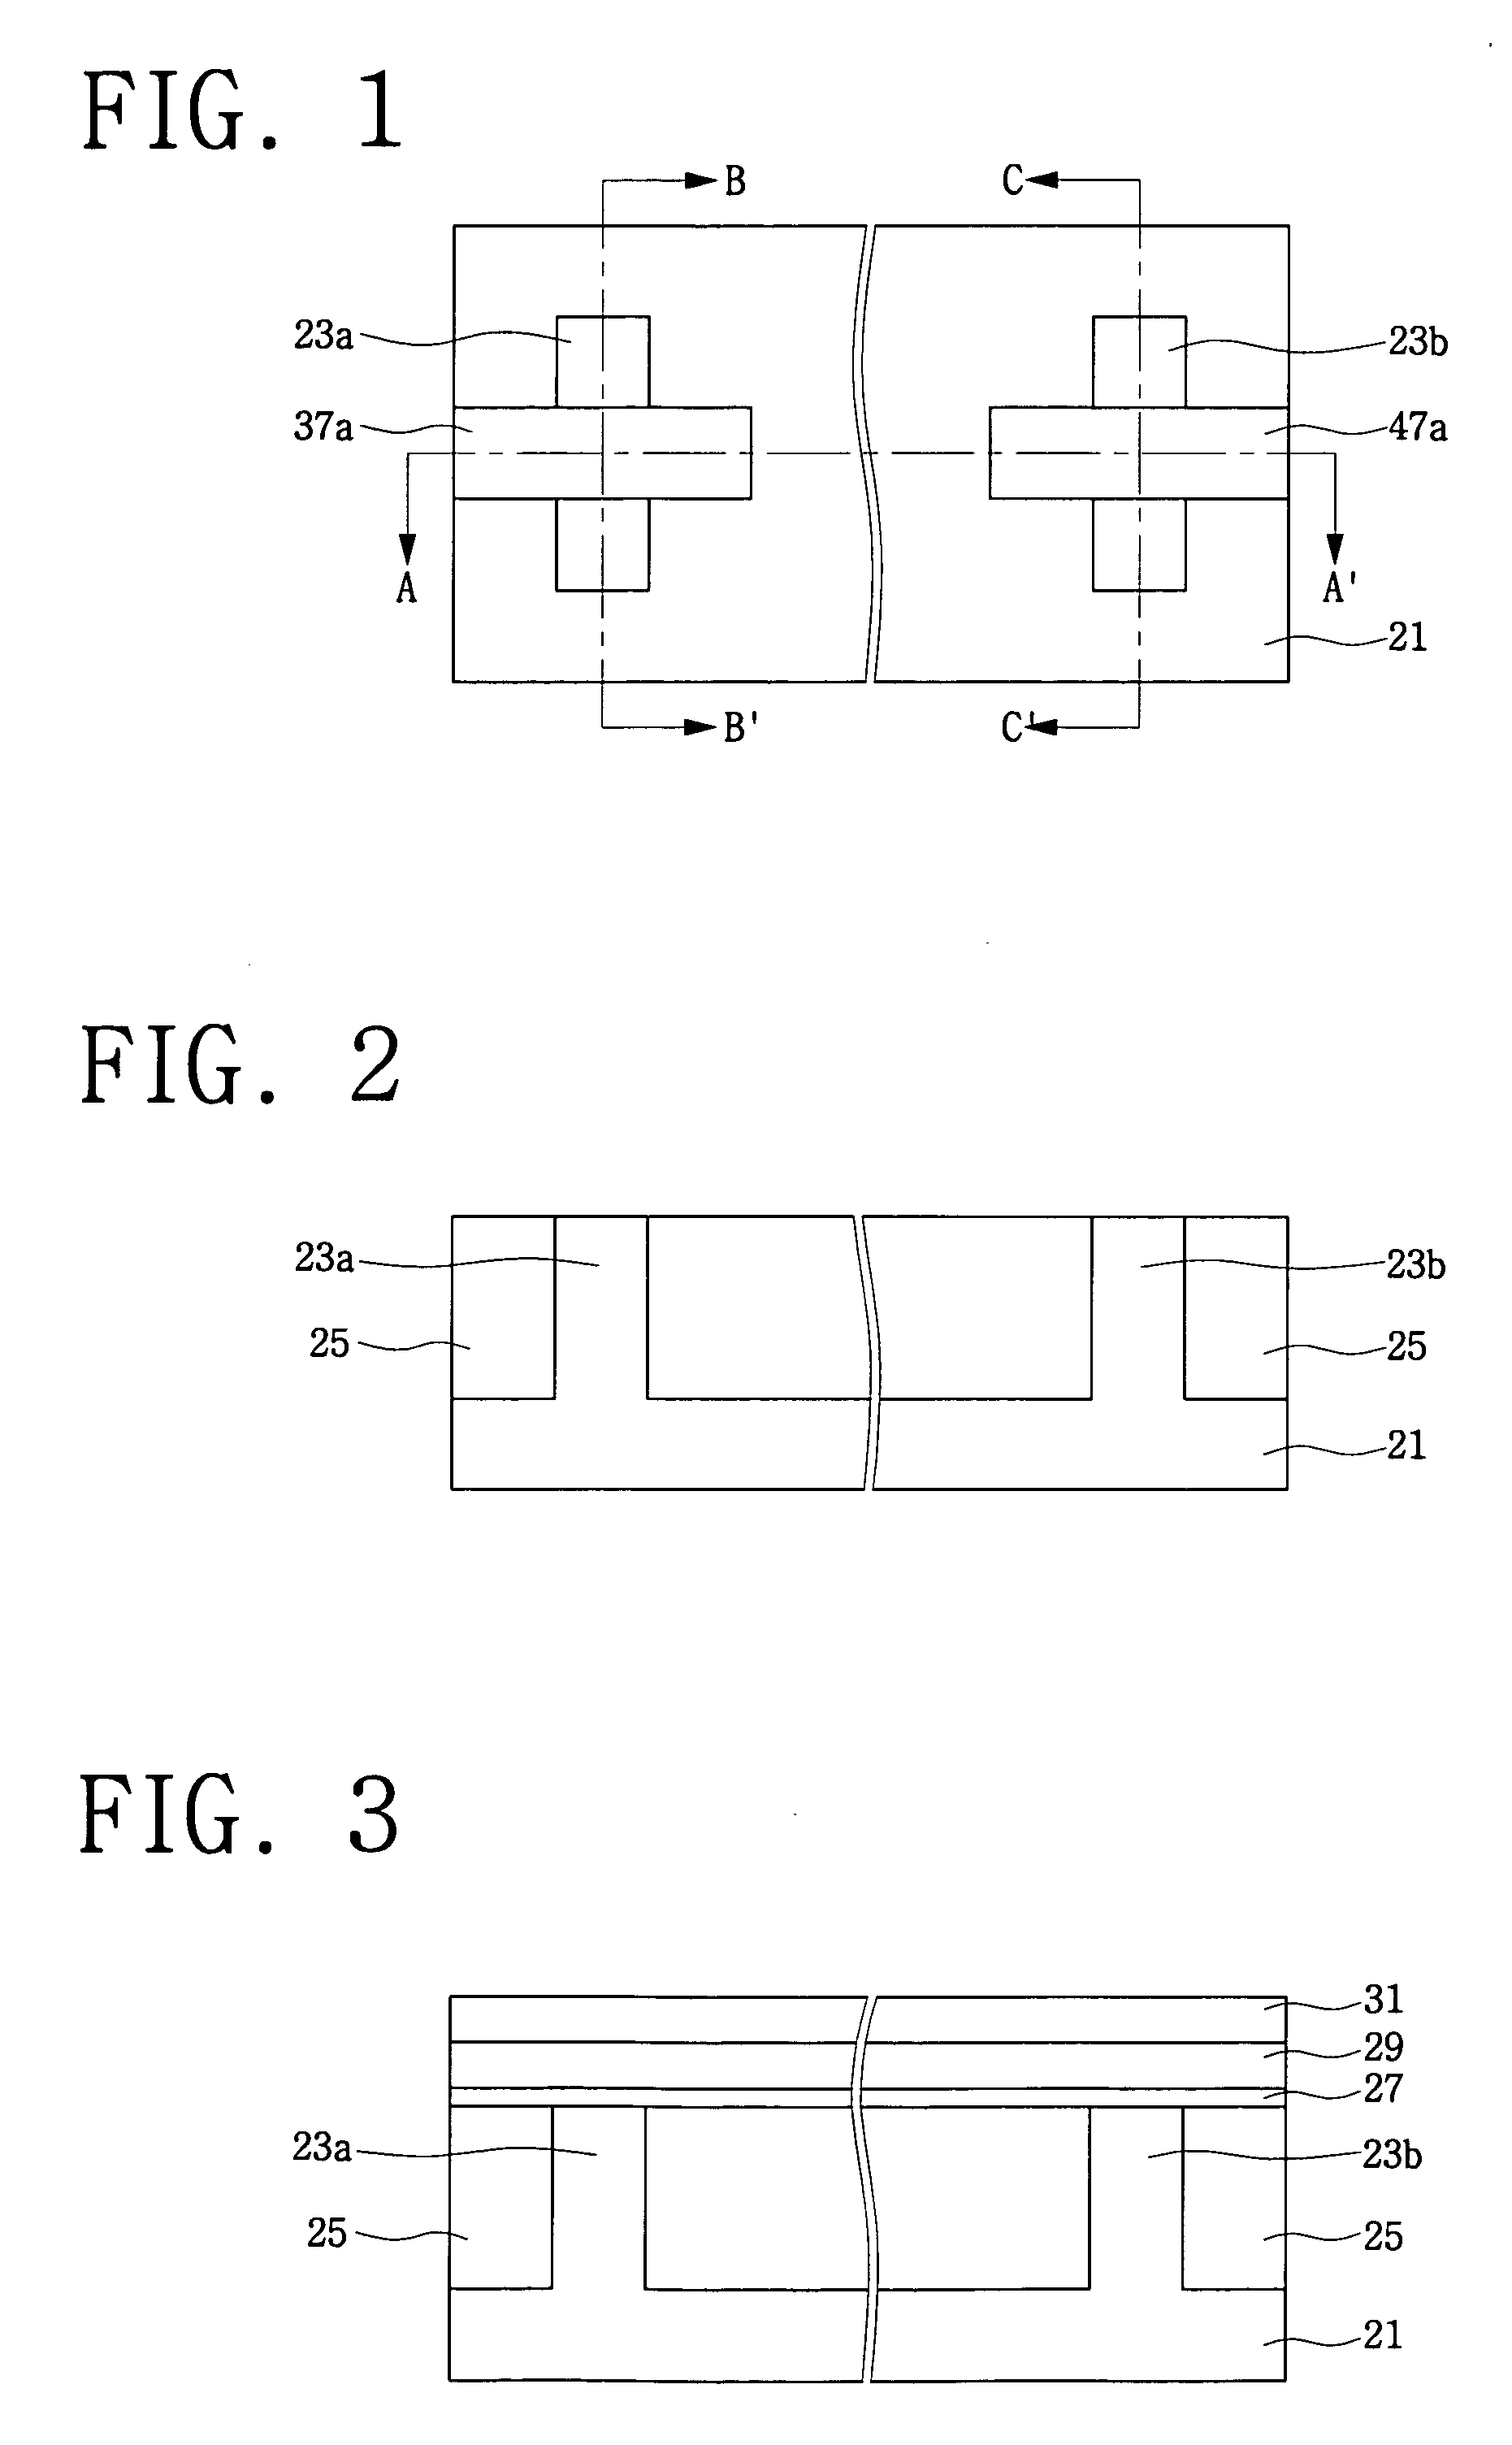 Complementary metal oxide semiconductor (CMOS) transistors having three-dimensional channel regions and methods of forming same